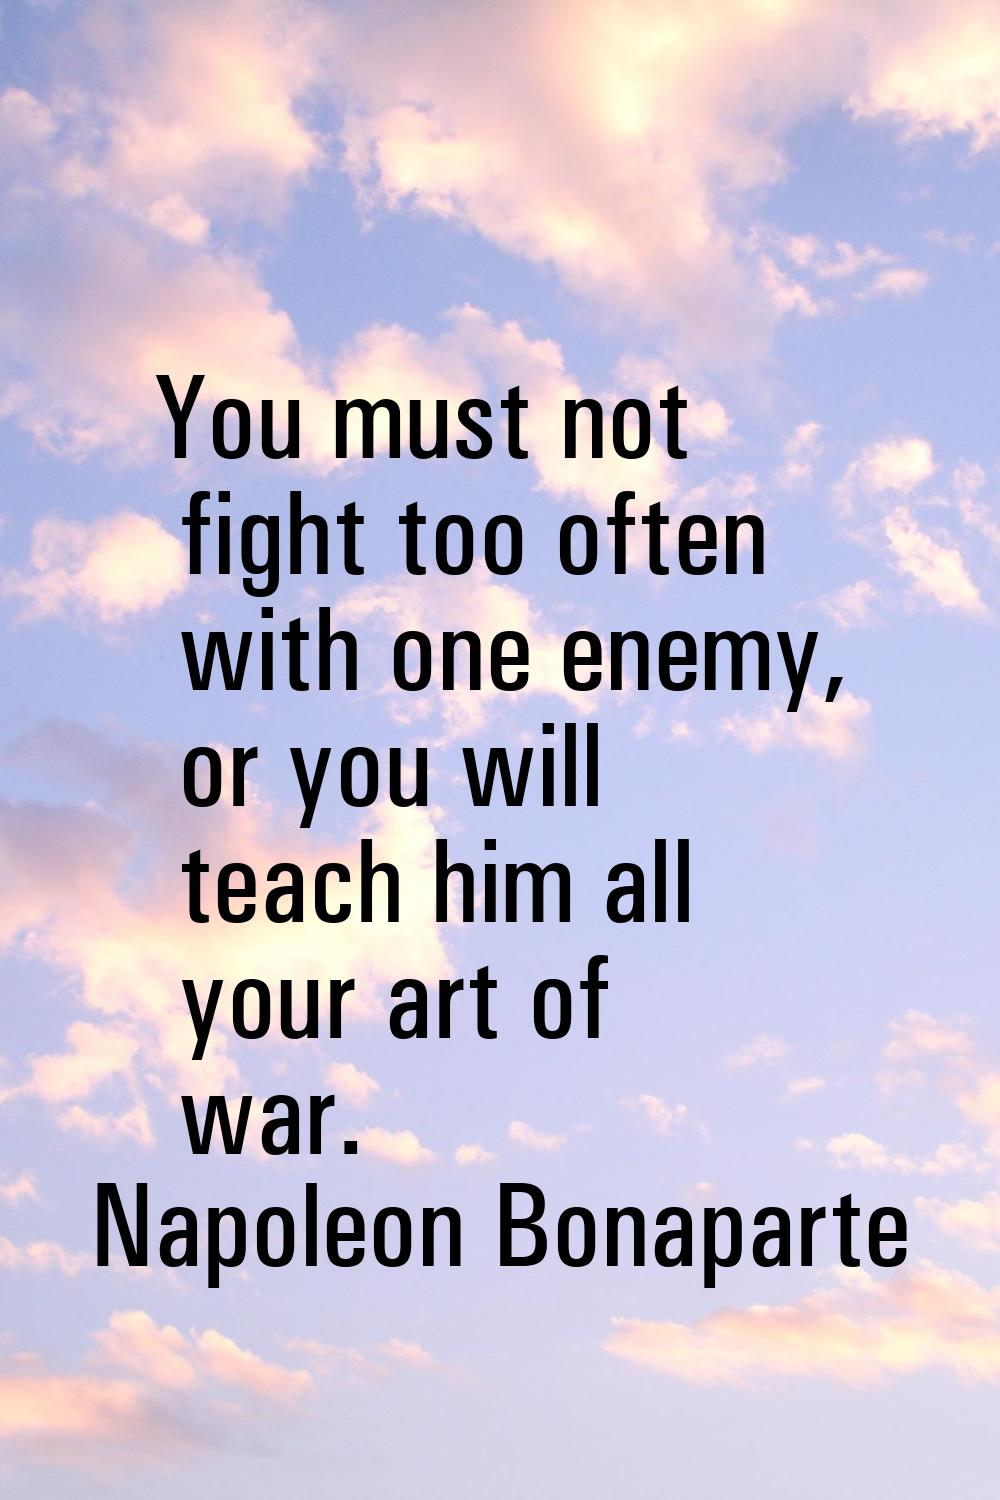 You must not fight too often with one enemy, or you will teach him all your art of war.